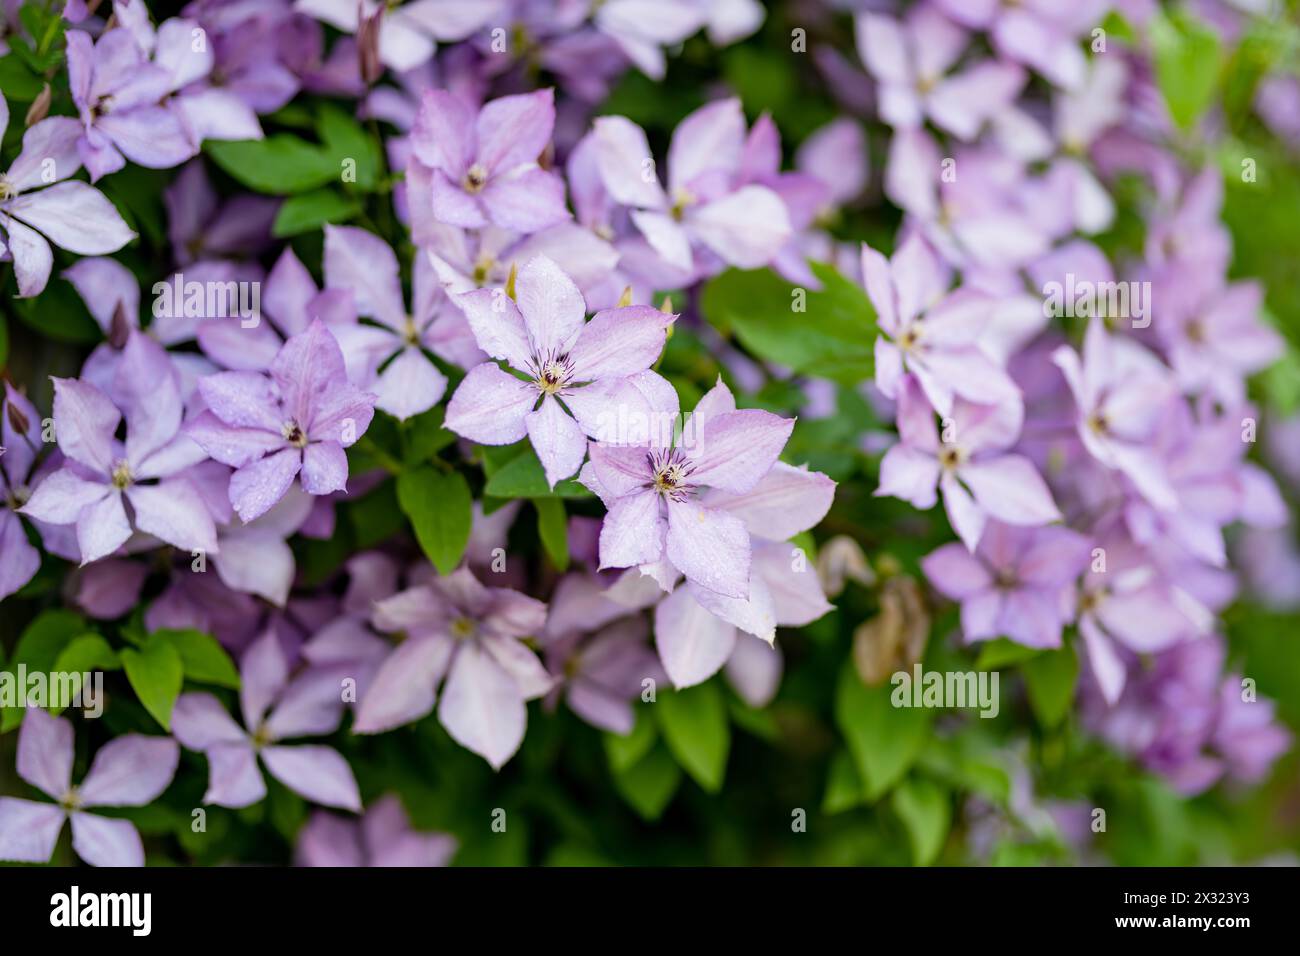 Flowering purple clematis in the garden. Flowers blossoming in summer. Beauty in nature. Stock Photo